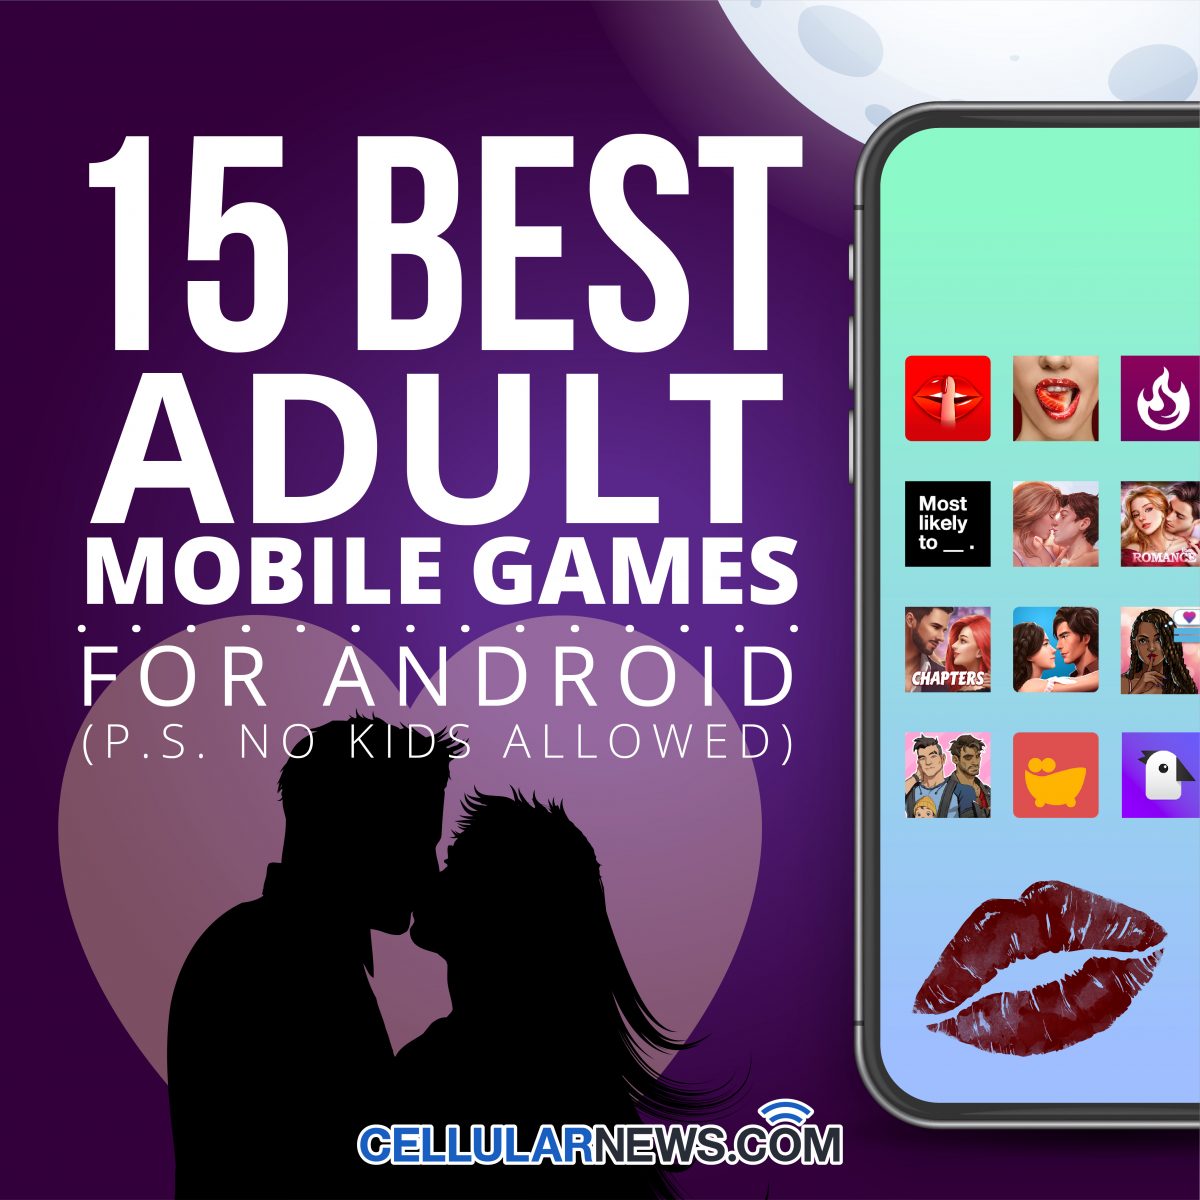 Sex games apps 2017 free for android